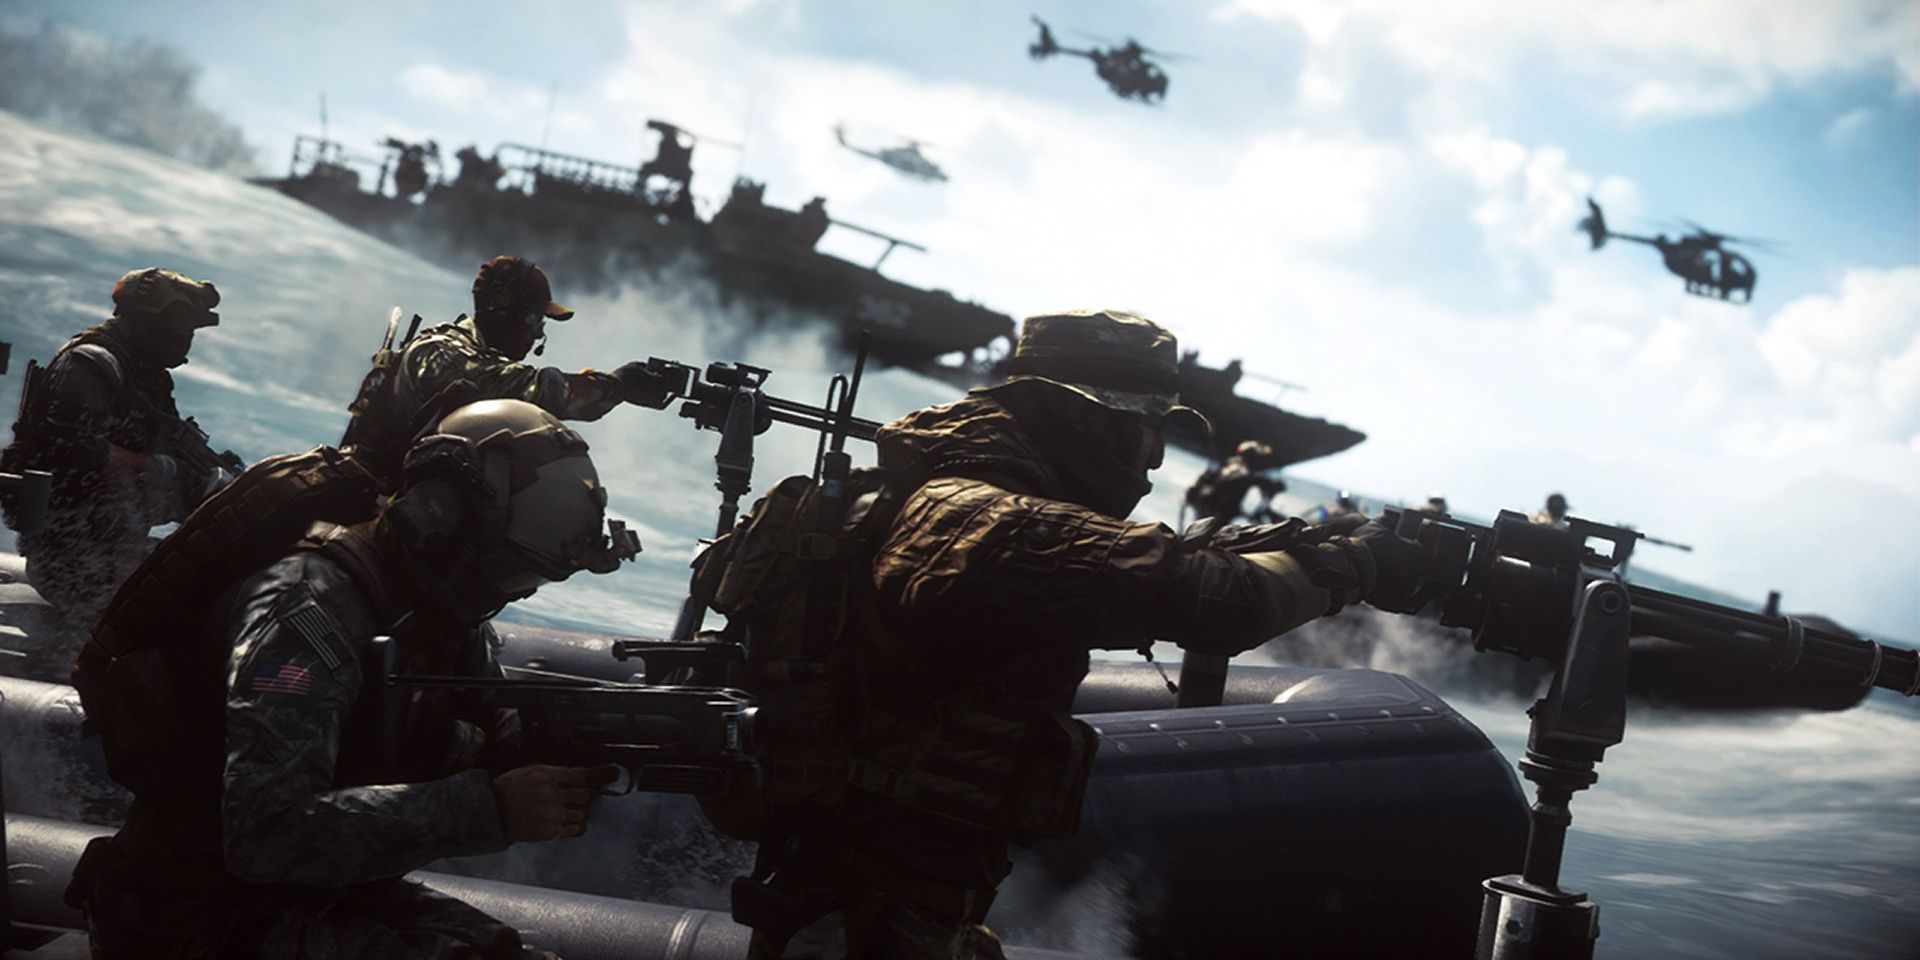 Players storming onto a beach in Battlefield 4